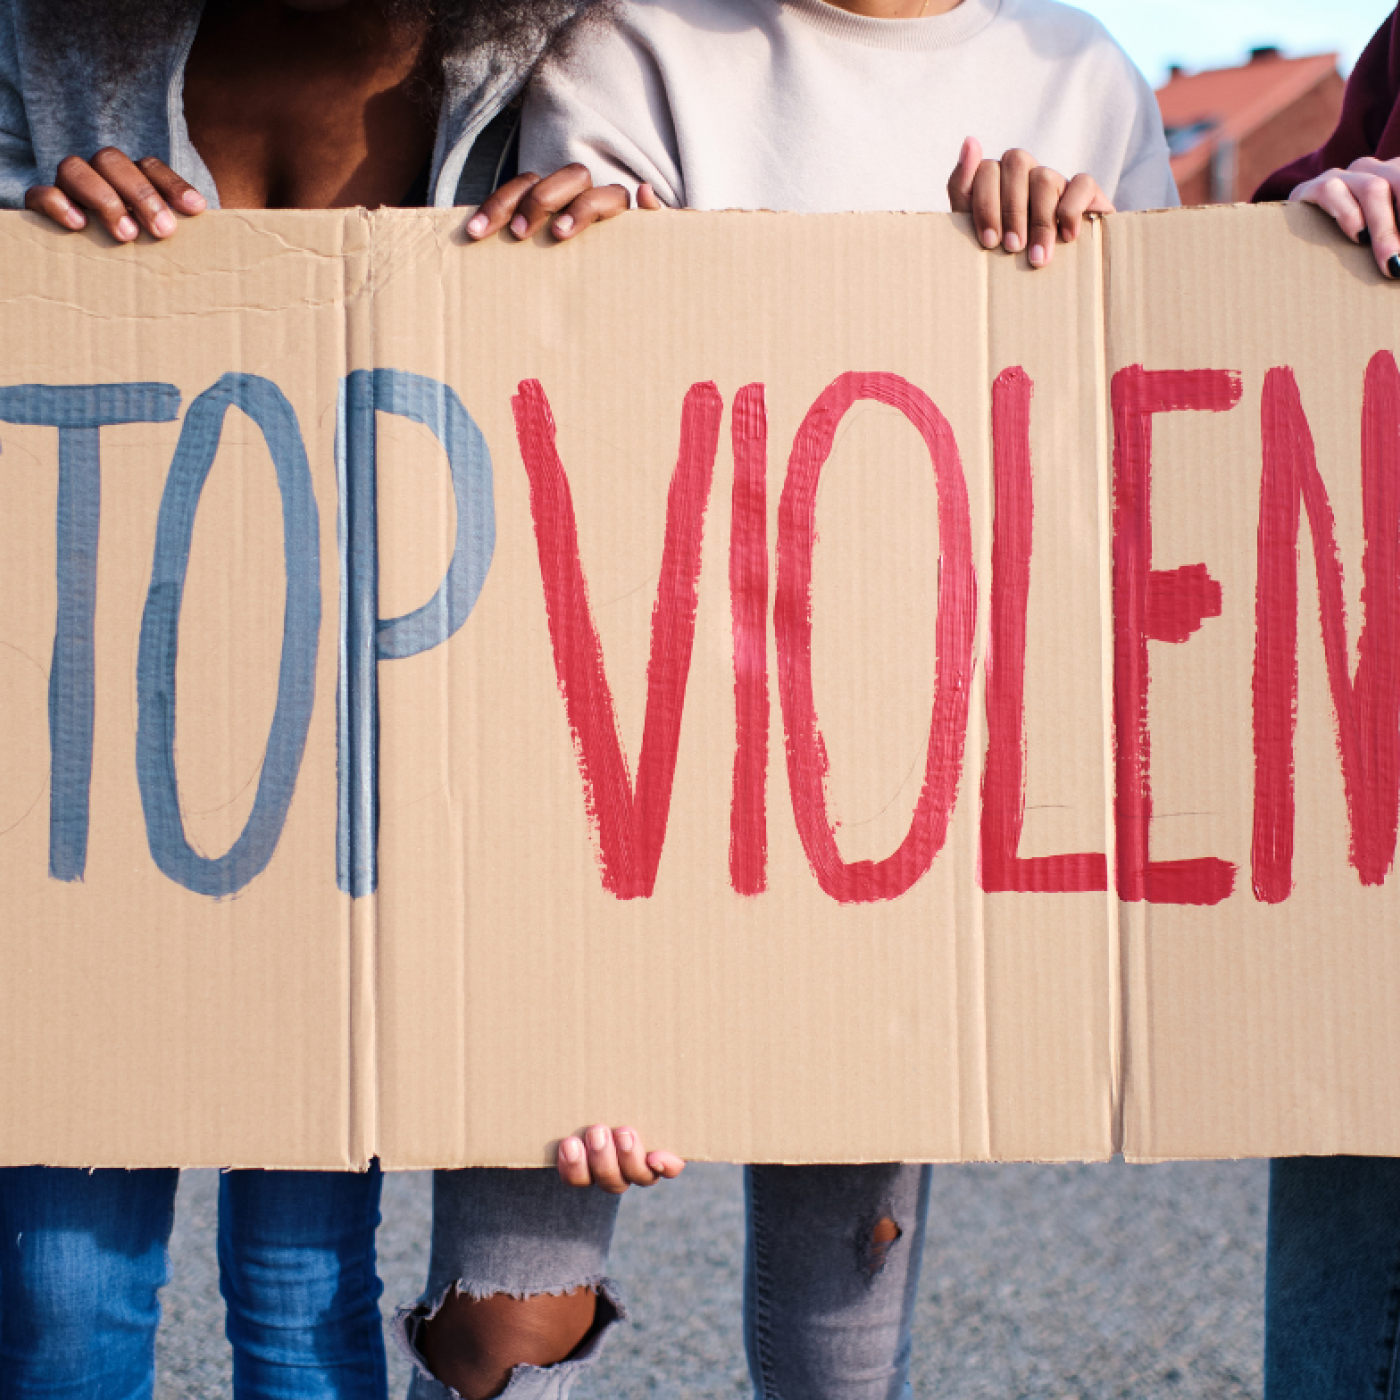 Stop Violence protest sign